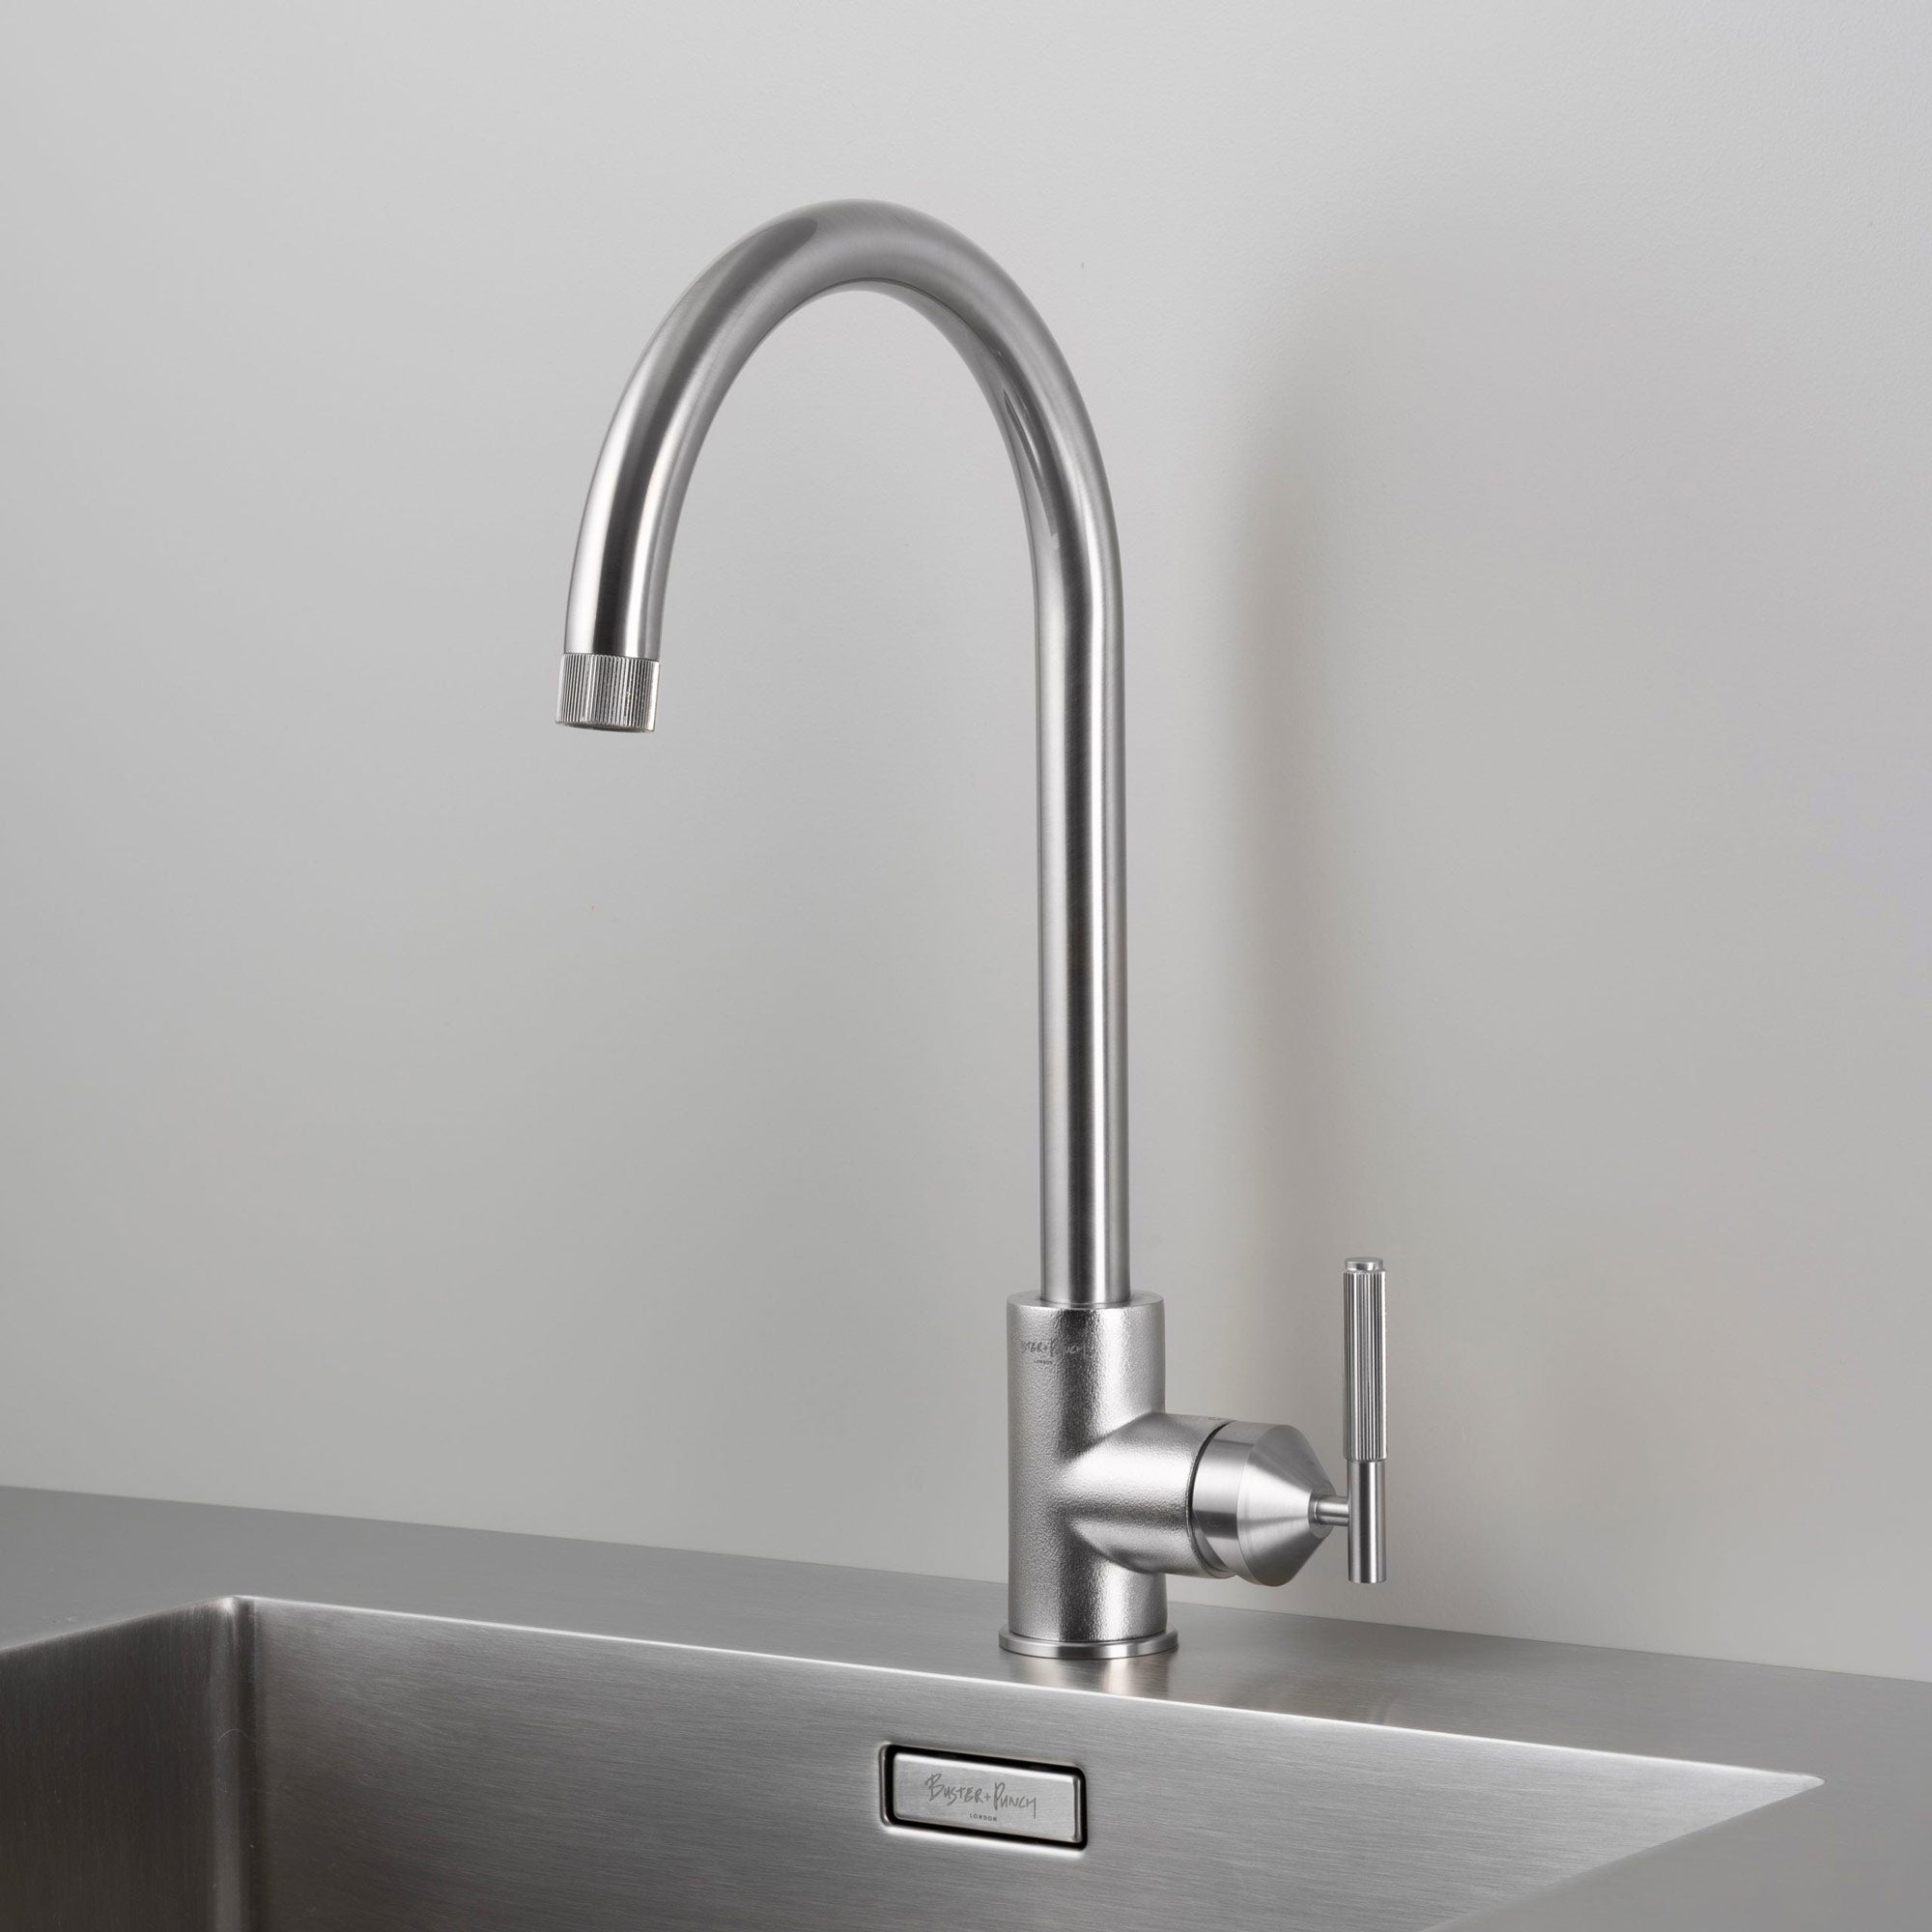 Buster + Punch Kitchen Faucet / Mixer / Linear